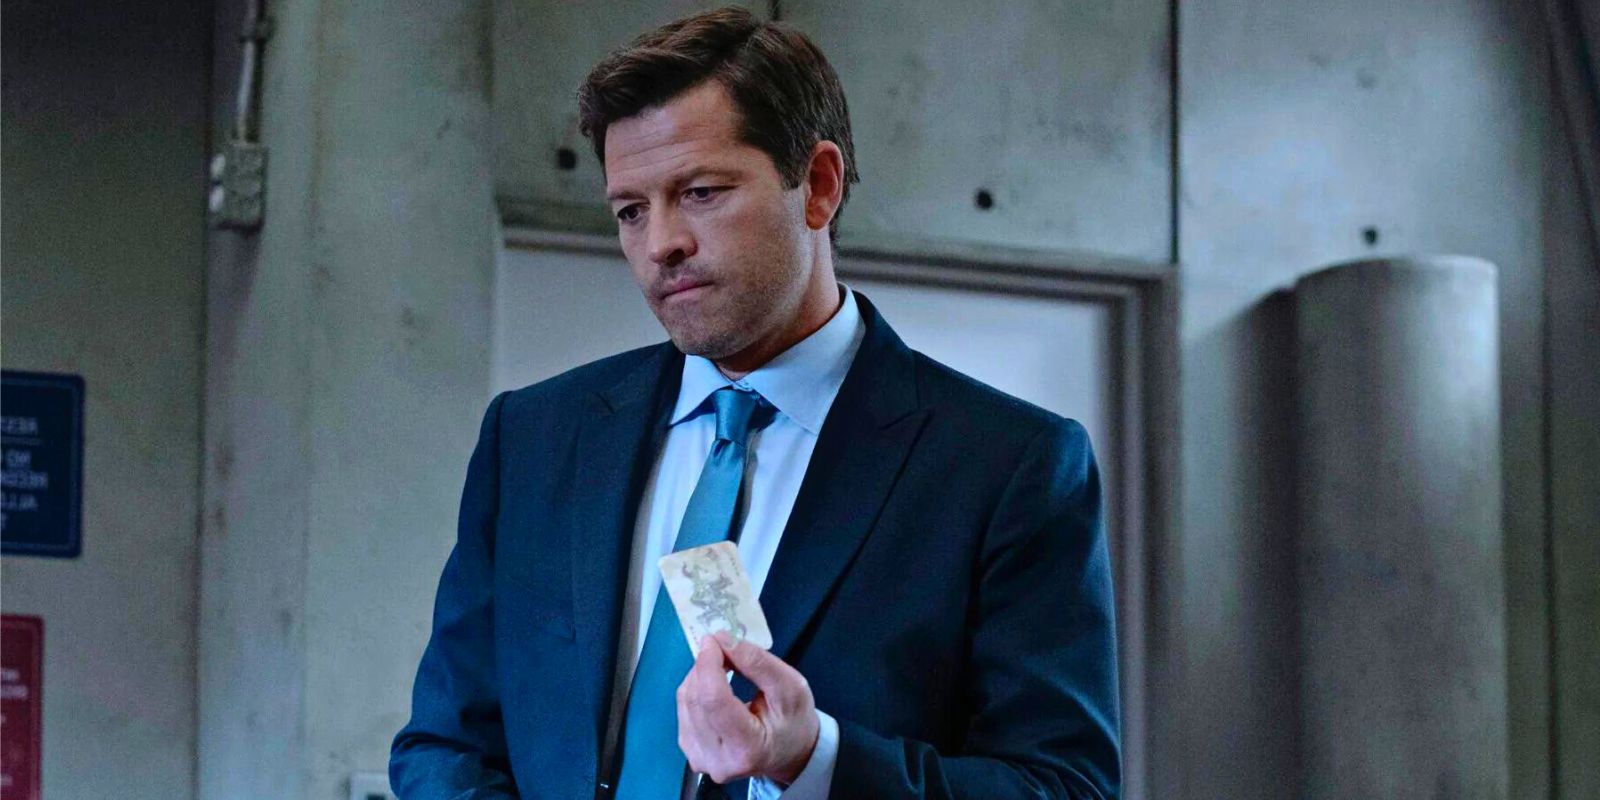 Misha Collins as Harvey Dent holds up a Joker playing card in Gotham Knights